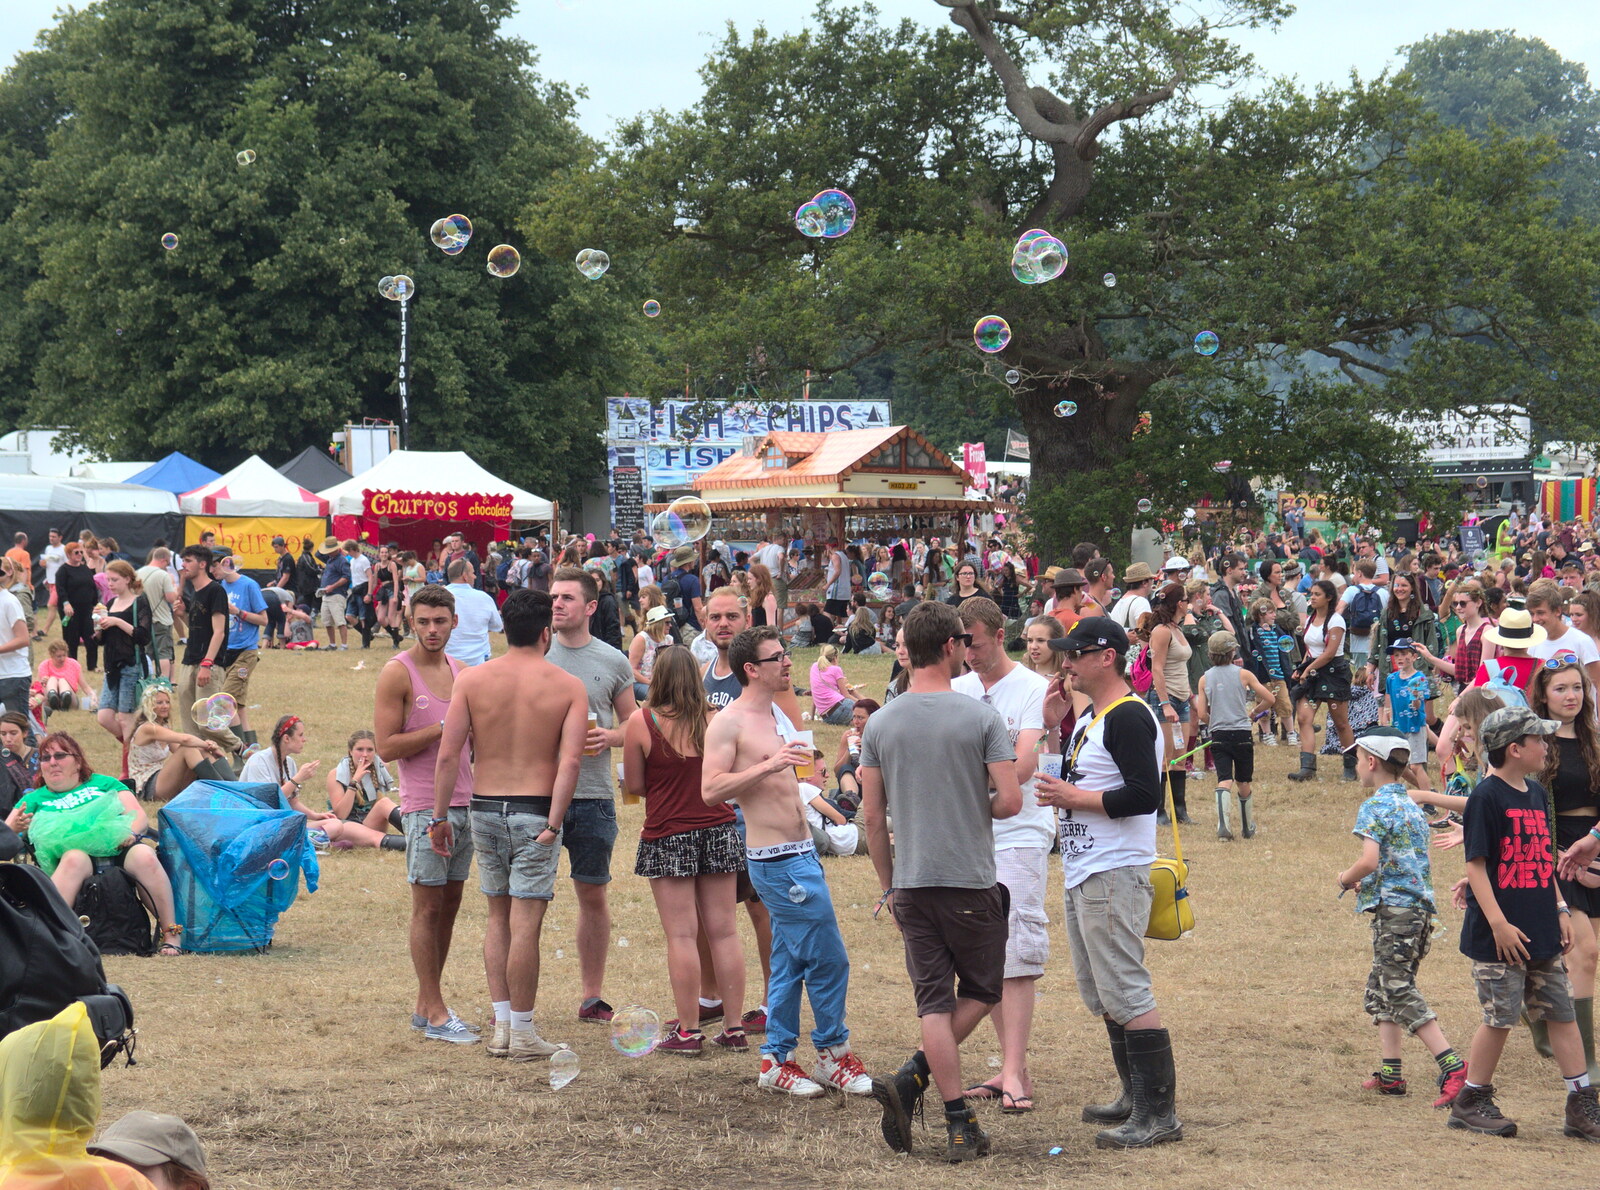 More bubbles float over the crowds from Latitude Festival, Henham Park, Southwold, Suffolk - 17th July 2014